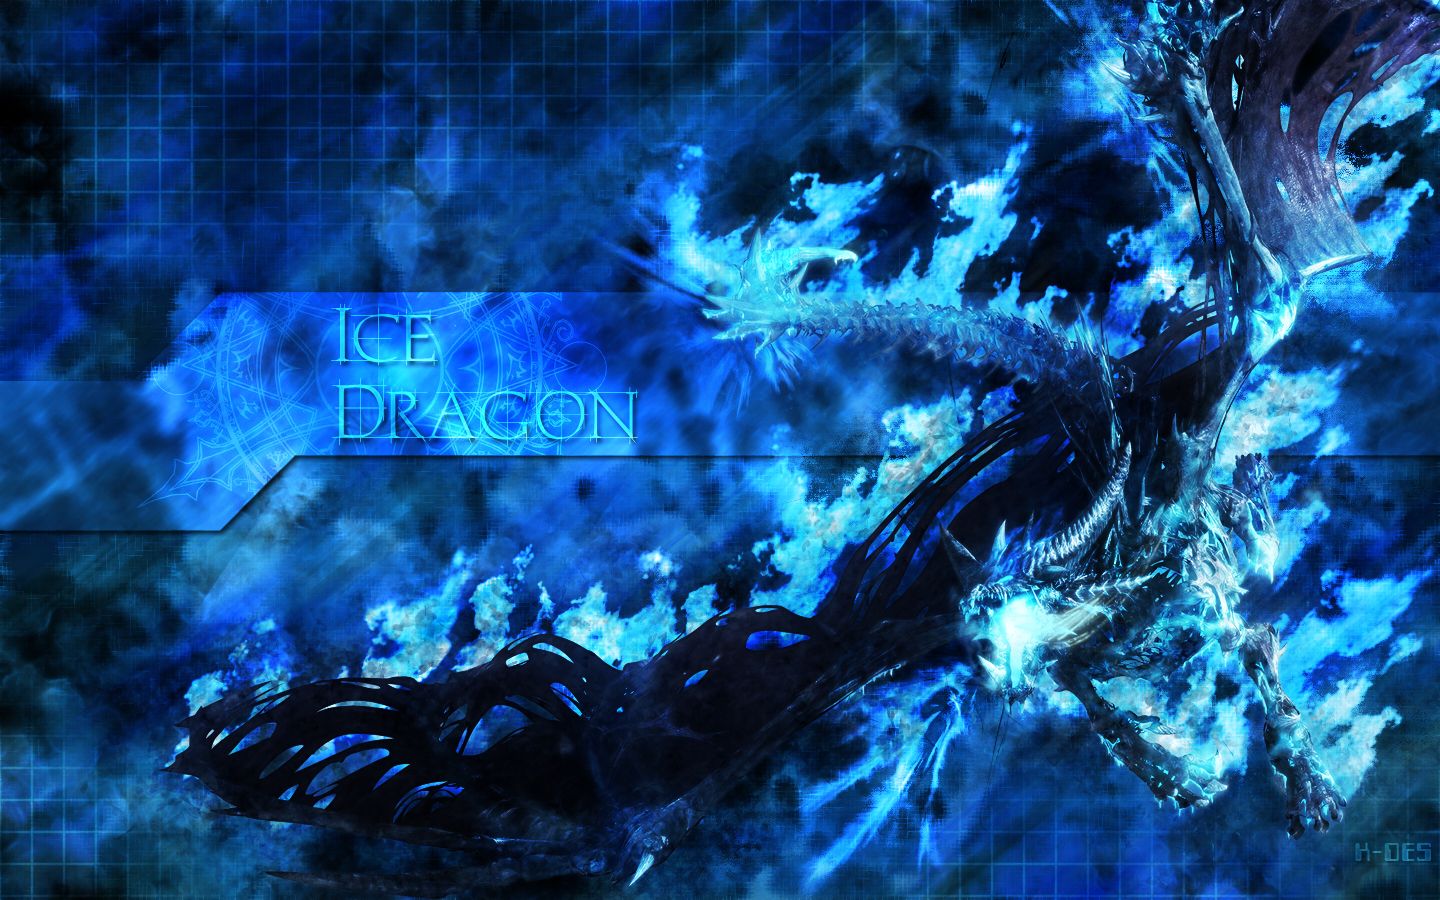 Ice Dragon Widescreen Background Wallpapers 10297 - Amazing Wallpaperz